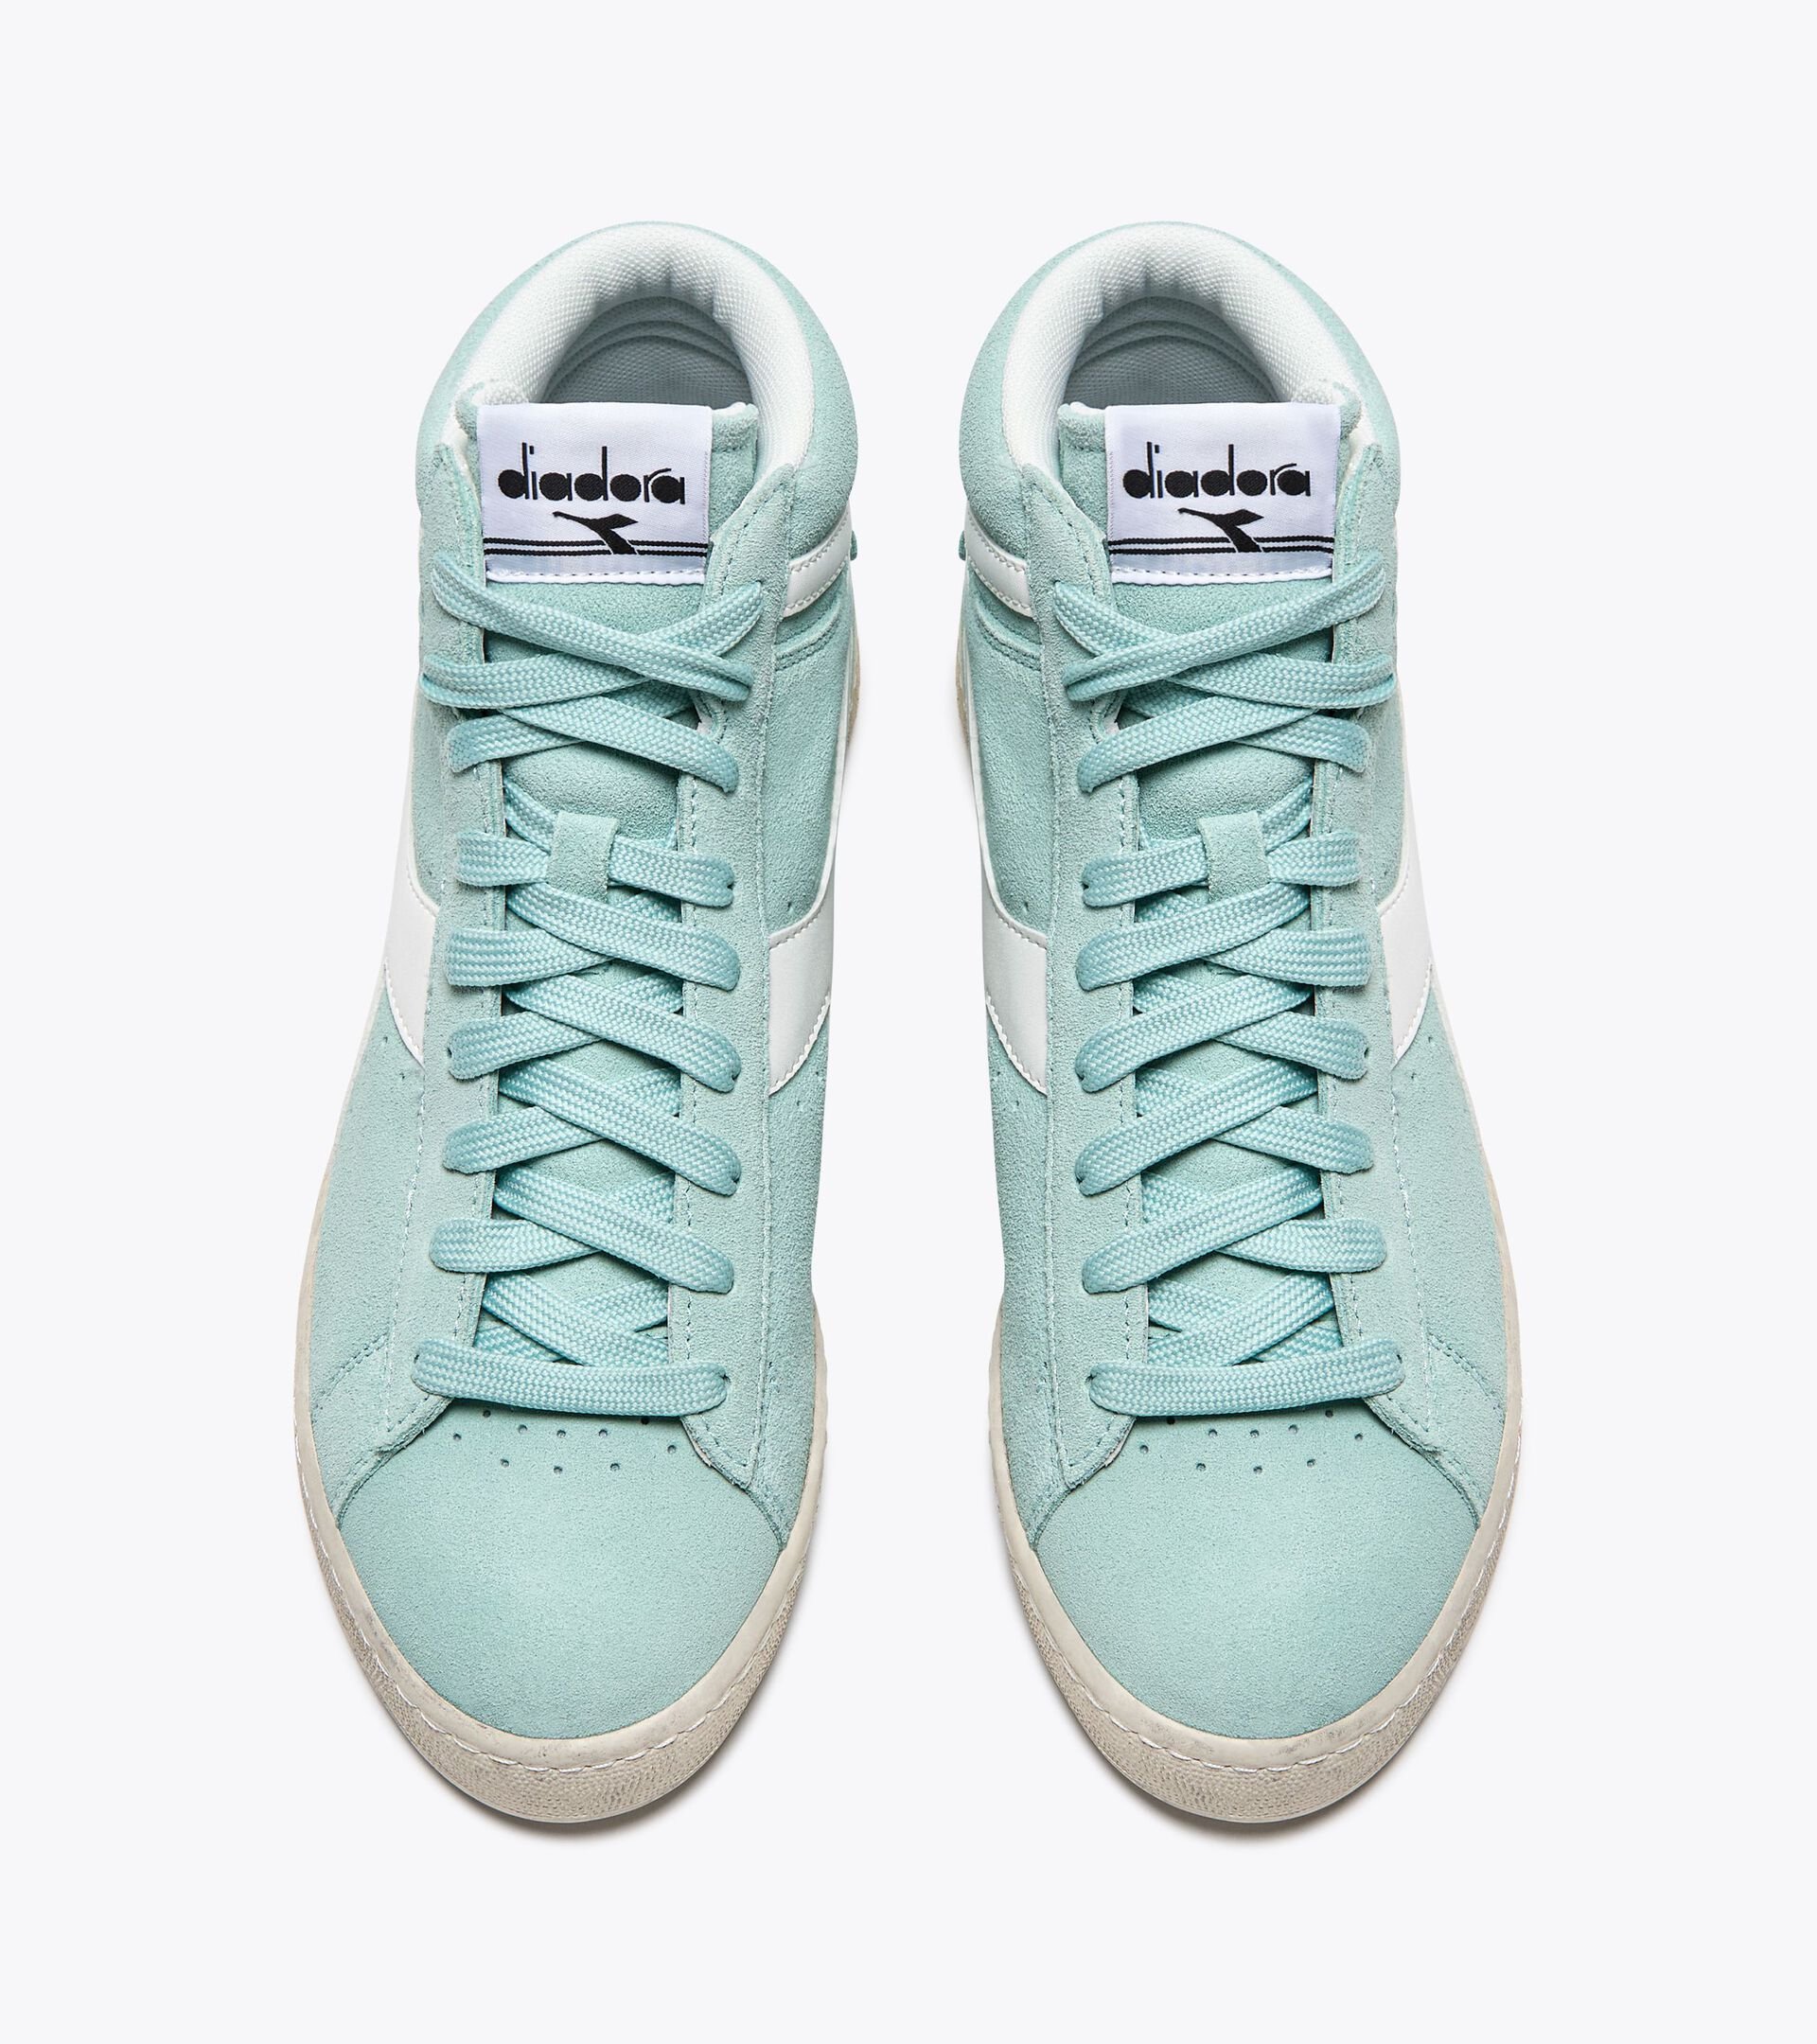 Sporty sneakers - Gender neutral GAME L HIGH SUEDE WAXED SURF SPRAY - Diadora